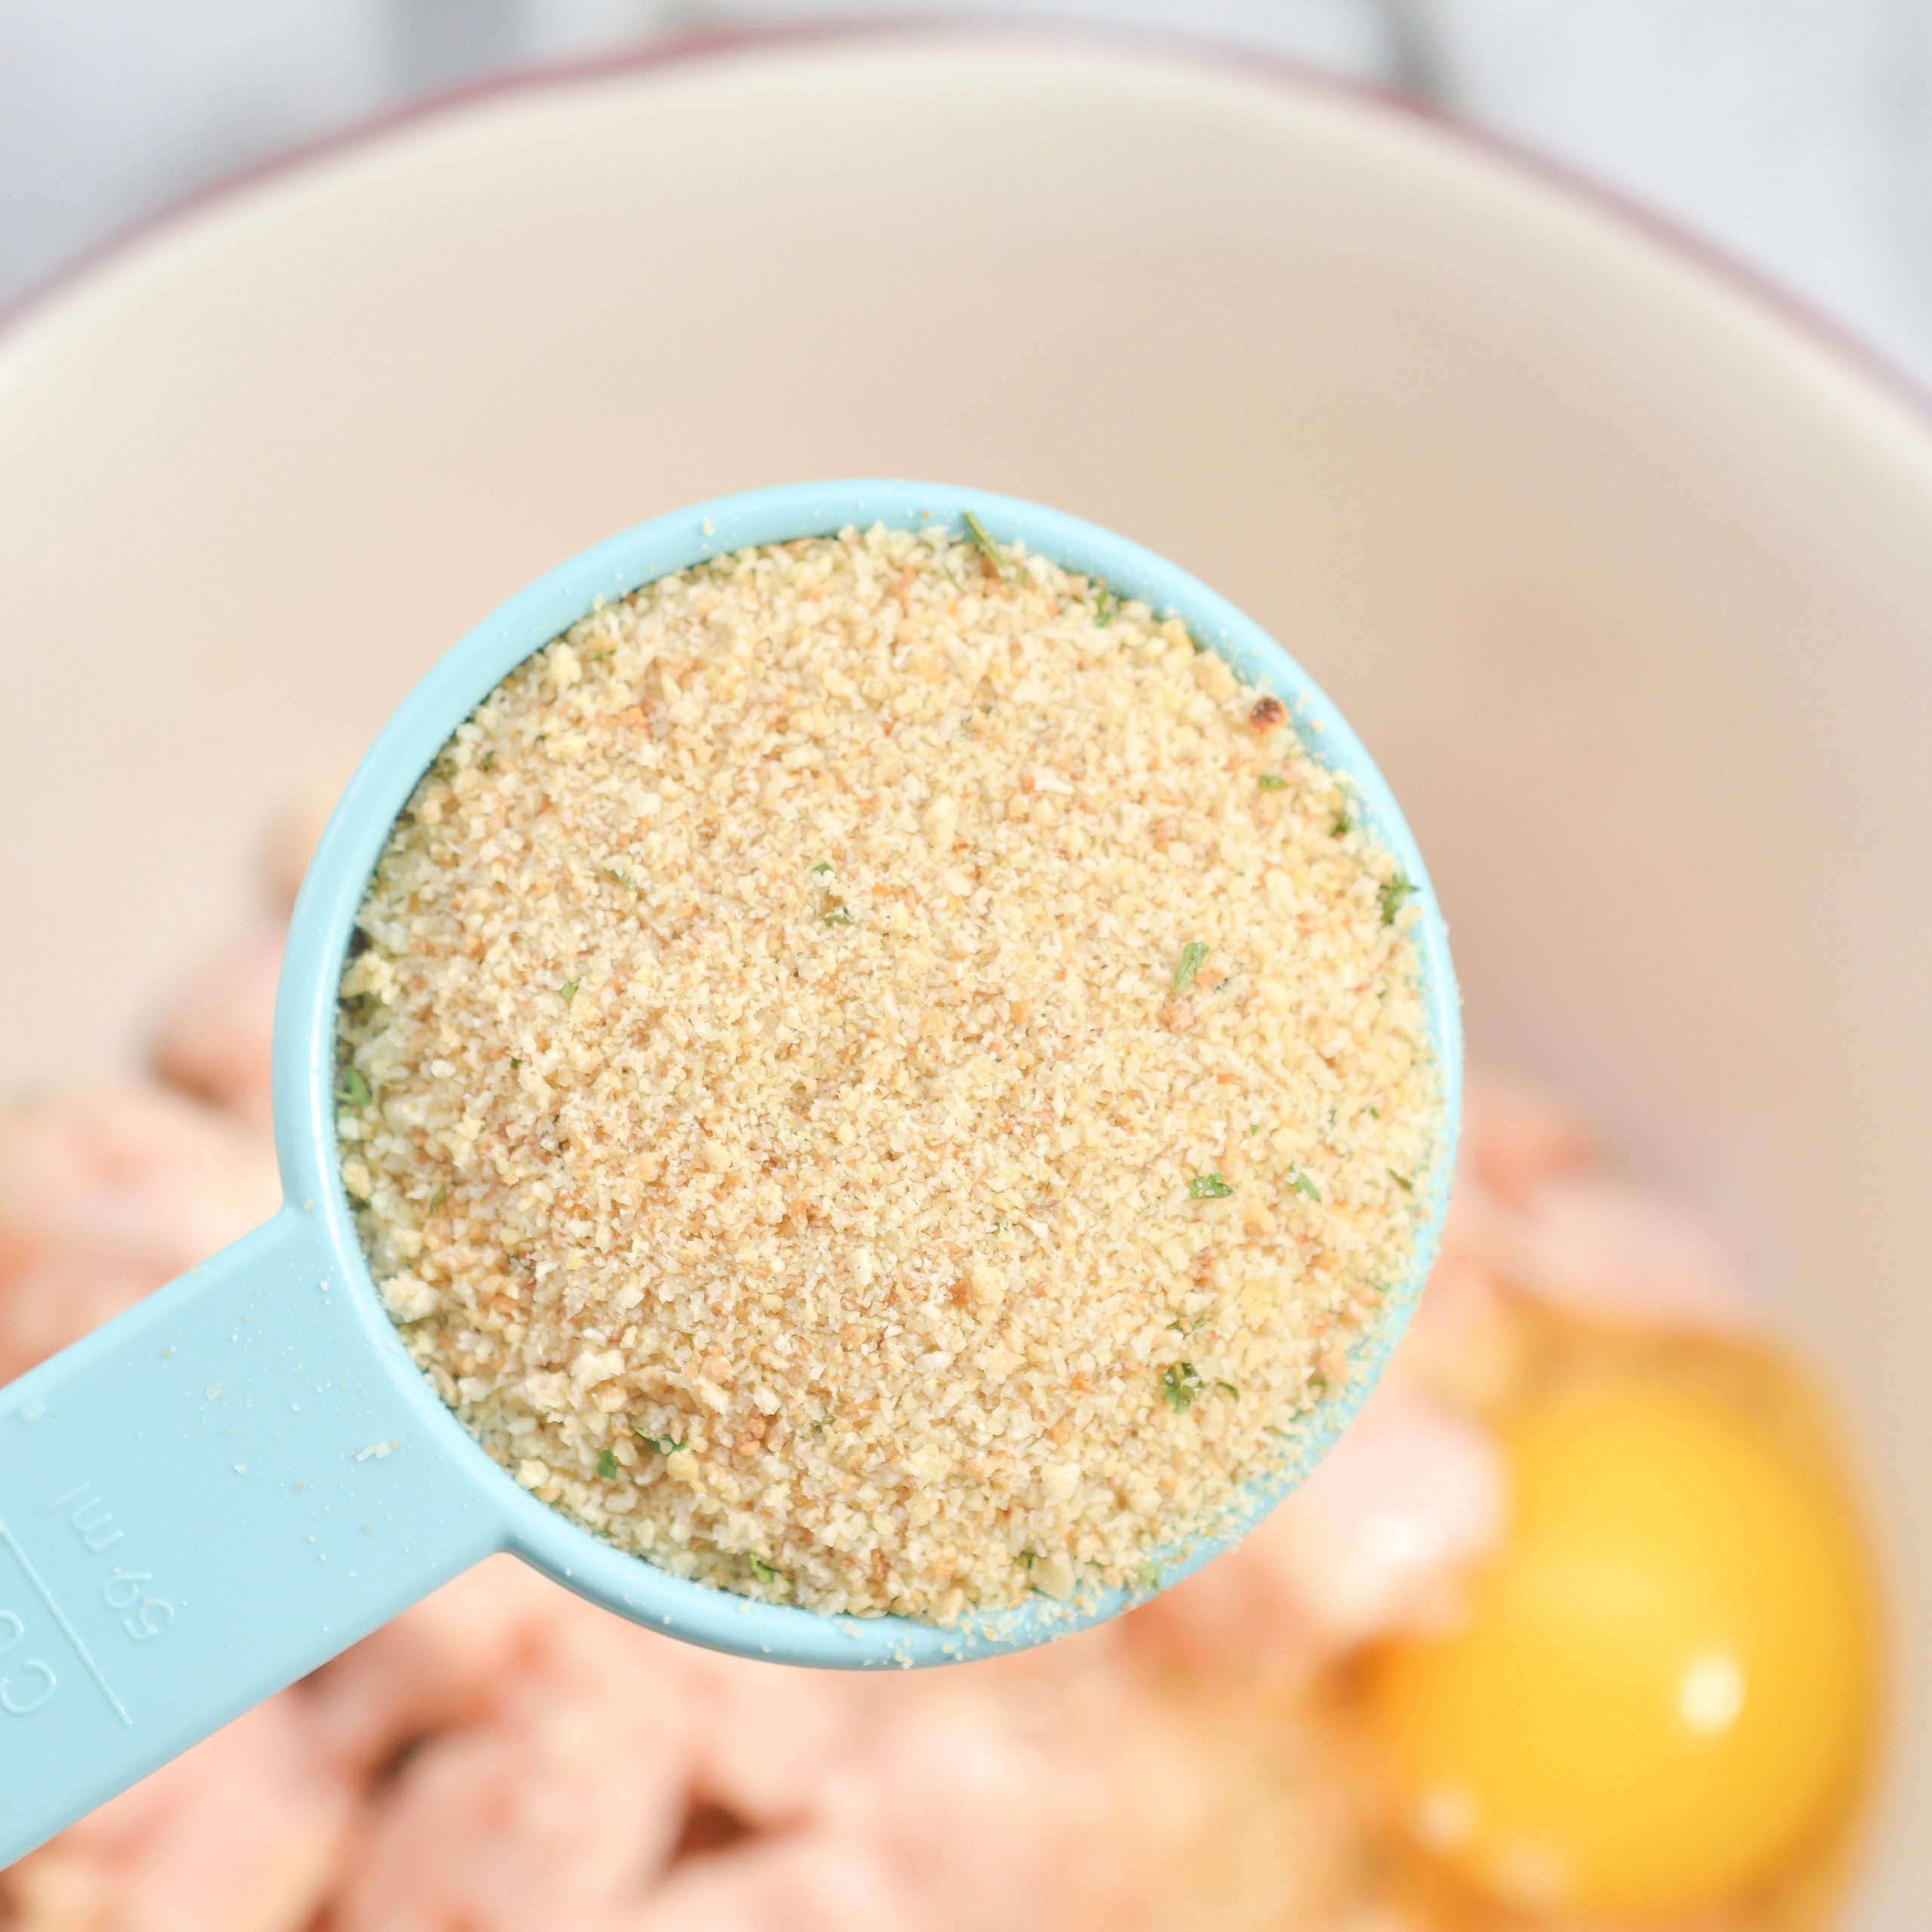 mix the chicken, egg, and breadcrumbs.